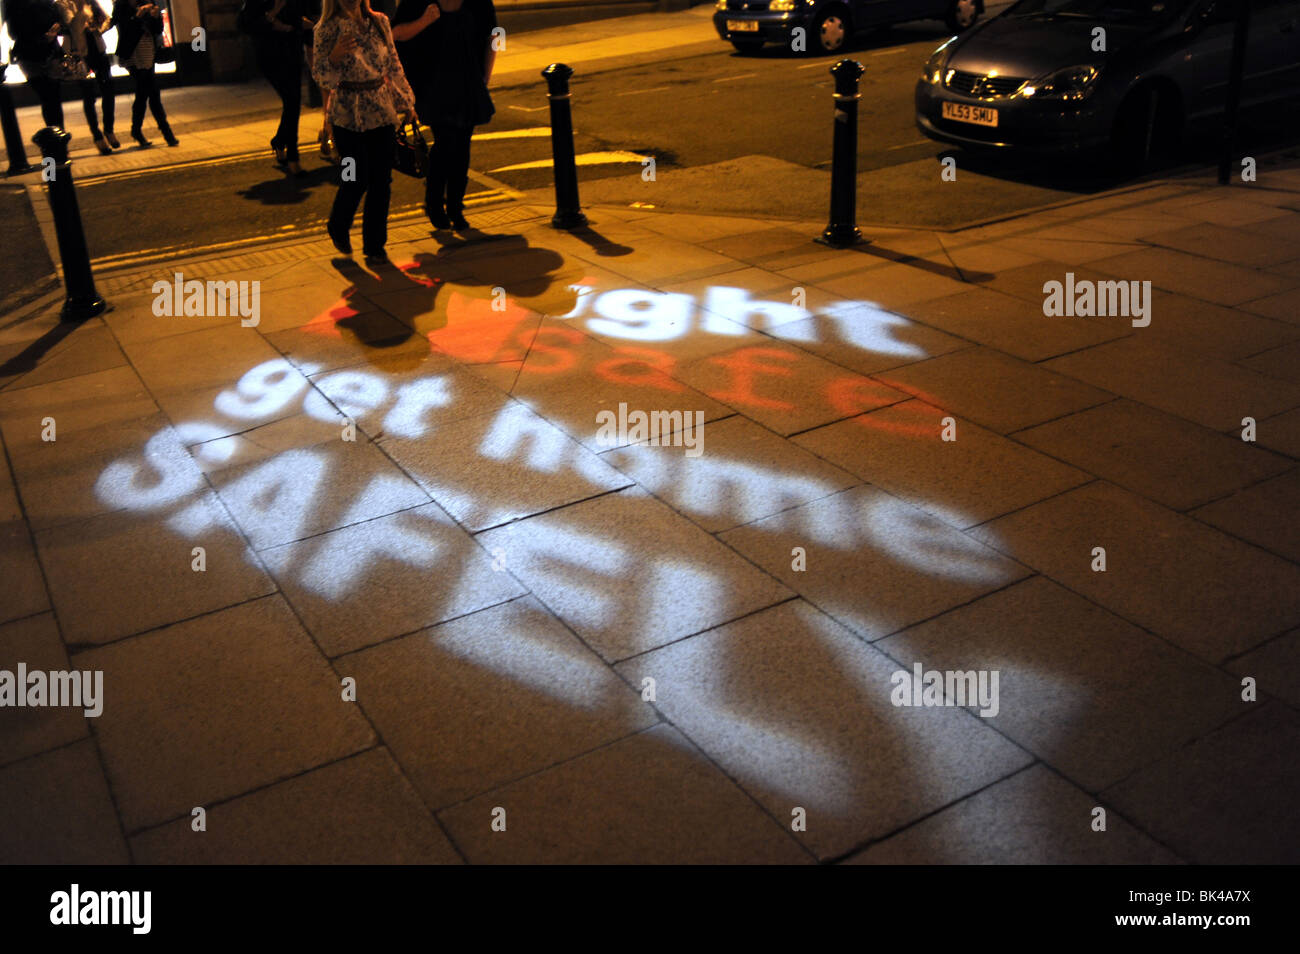 Night Safe Get Home Safely police signs beamed on to the street in Harrogate Yorkshire UK Stock Photo